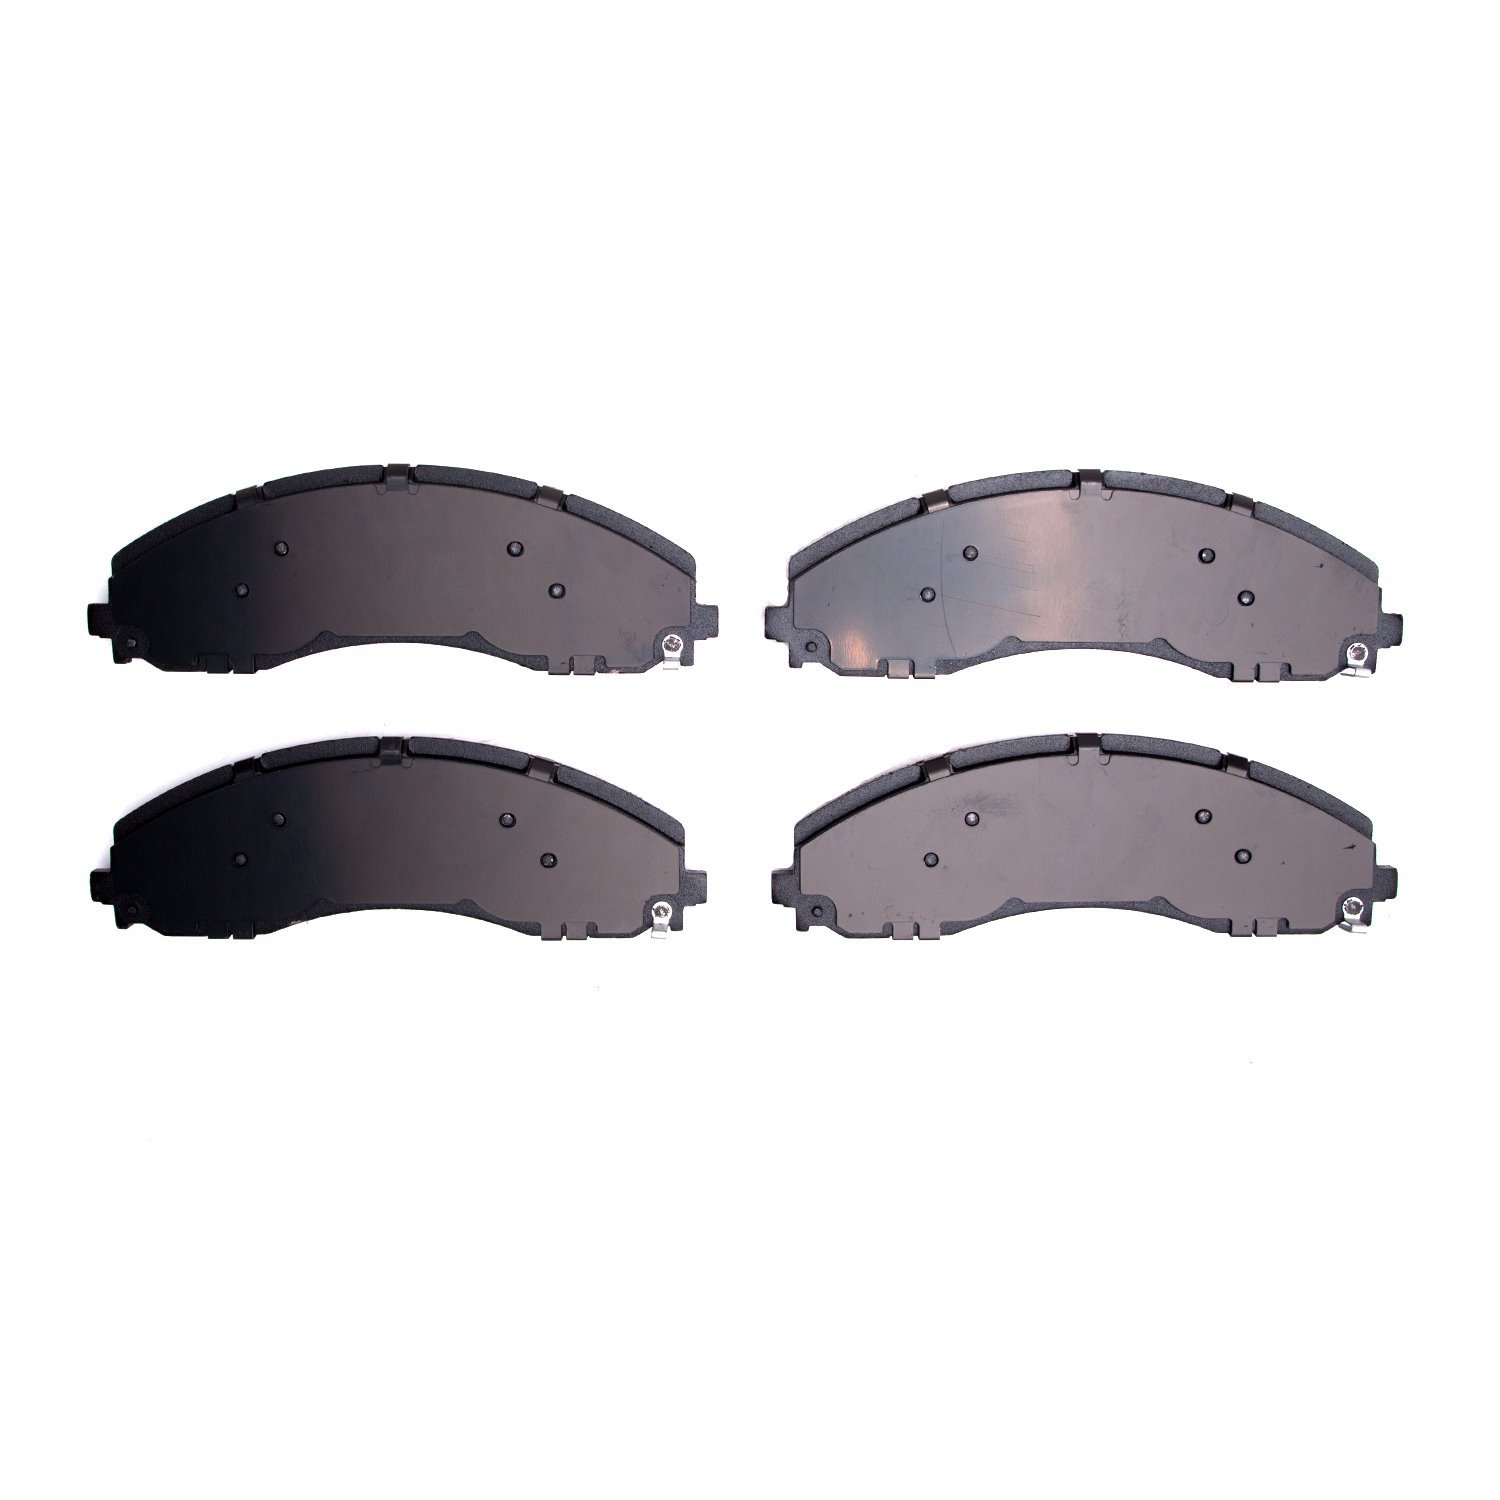 1551-2018-00 5000 Advanced Semi-Metallic Brake Pads, Fits Select Ford/Lincoln/Mercury/Mazda, Position: Fr,Fr & Rr,Front,Rear,Rr